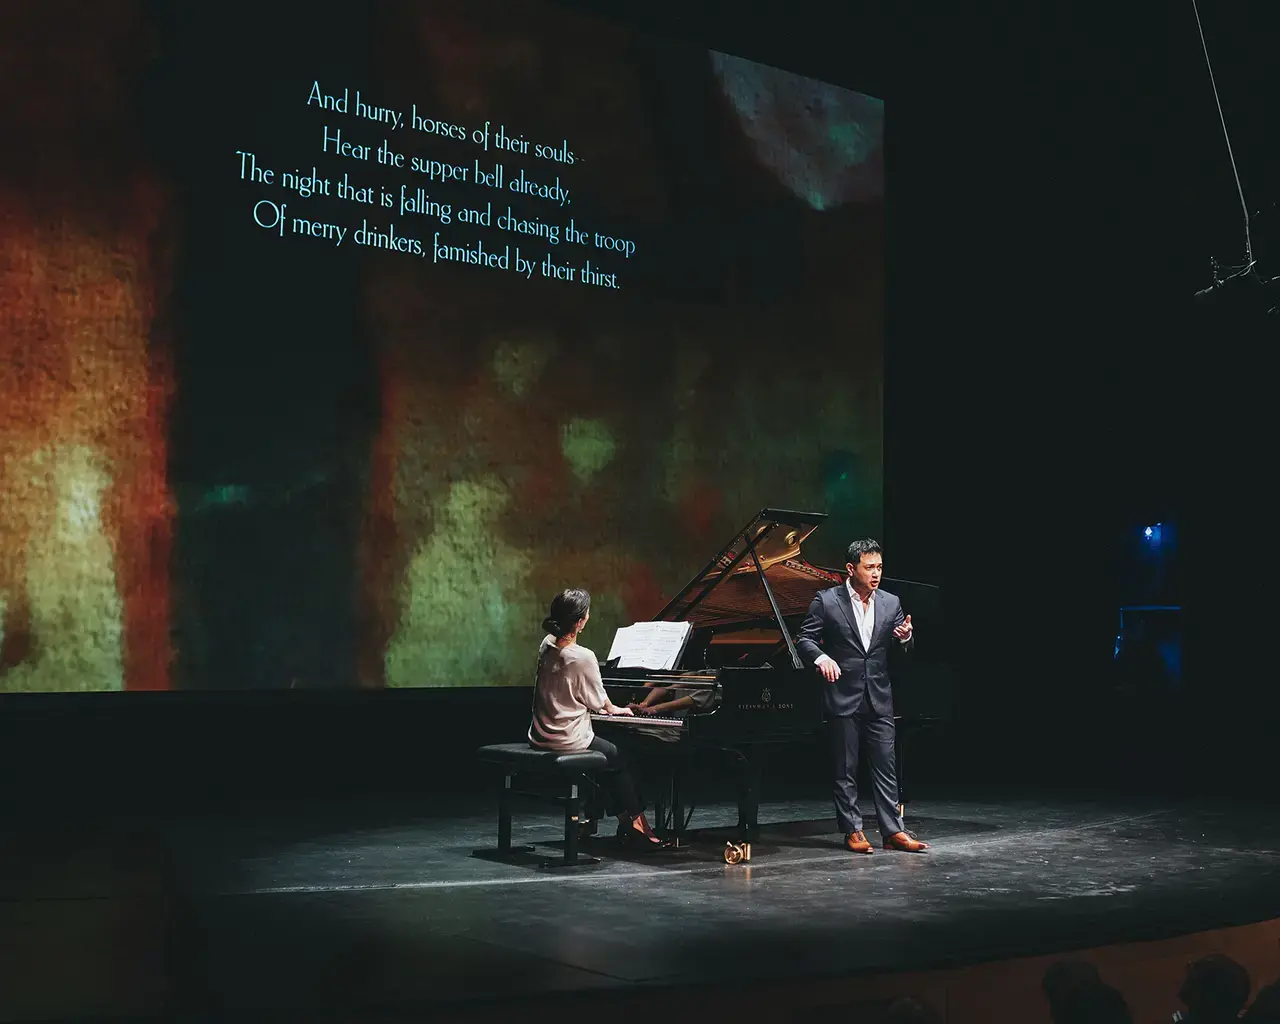 Philadelphia Chamber Music Society, Emerging Voices: Art Song &amp; Social Connection, 2019. Nick Phan, tenor, and Myra Huang, piano, performing Claude Debussy. Photo by Matt Genders.